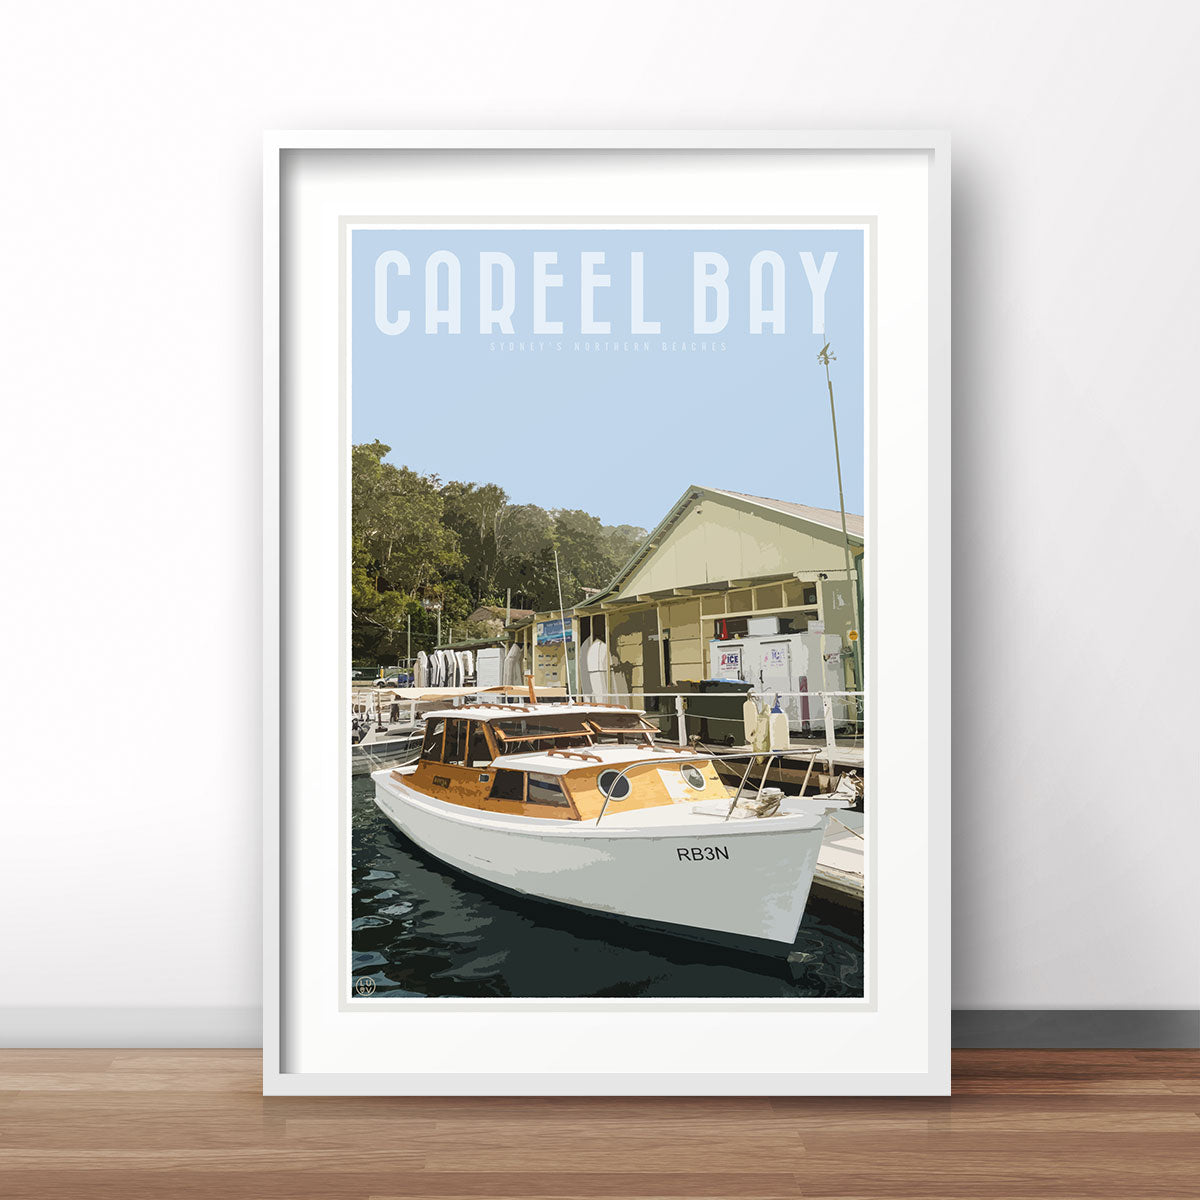 Careel Bay vintage travel style print by places we luv